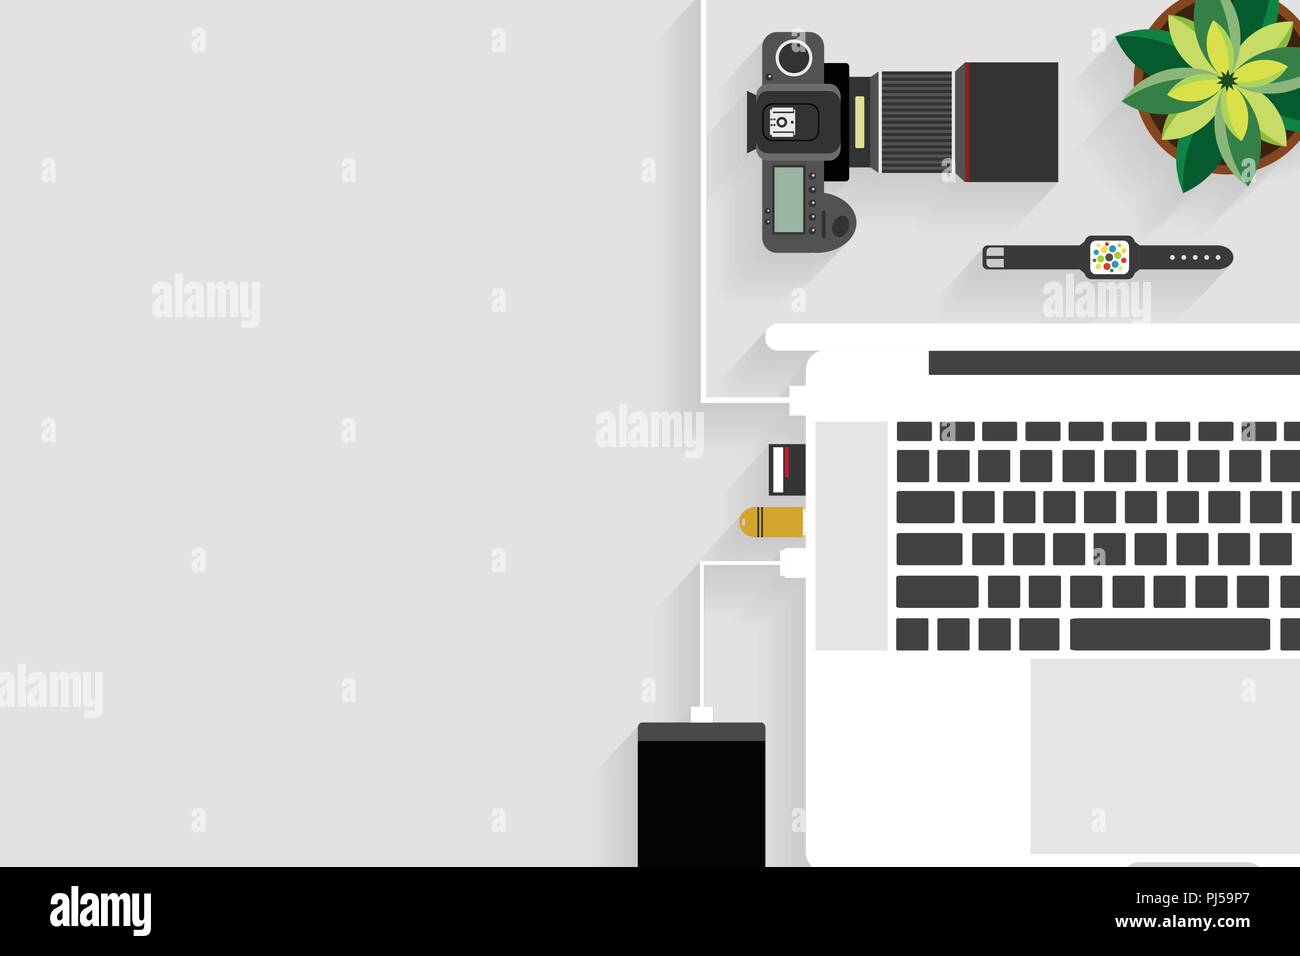 Top view of table working, working desk with gadget and free space for text and accessory on table, laptop, keyboard, book, note, coffee cup, gadget Stock Vector